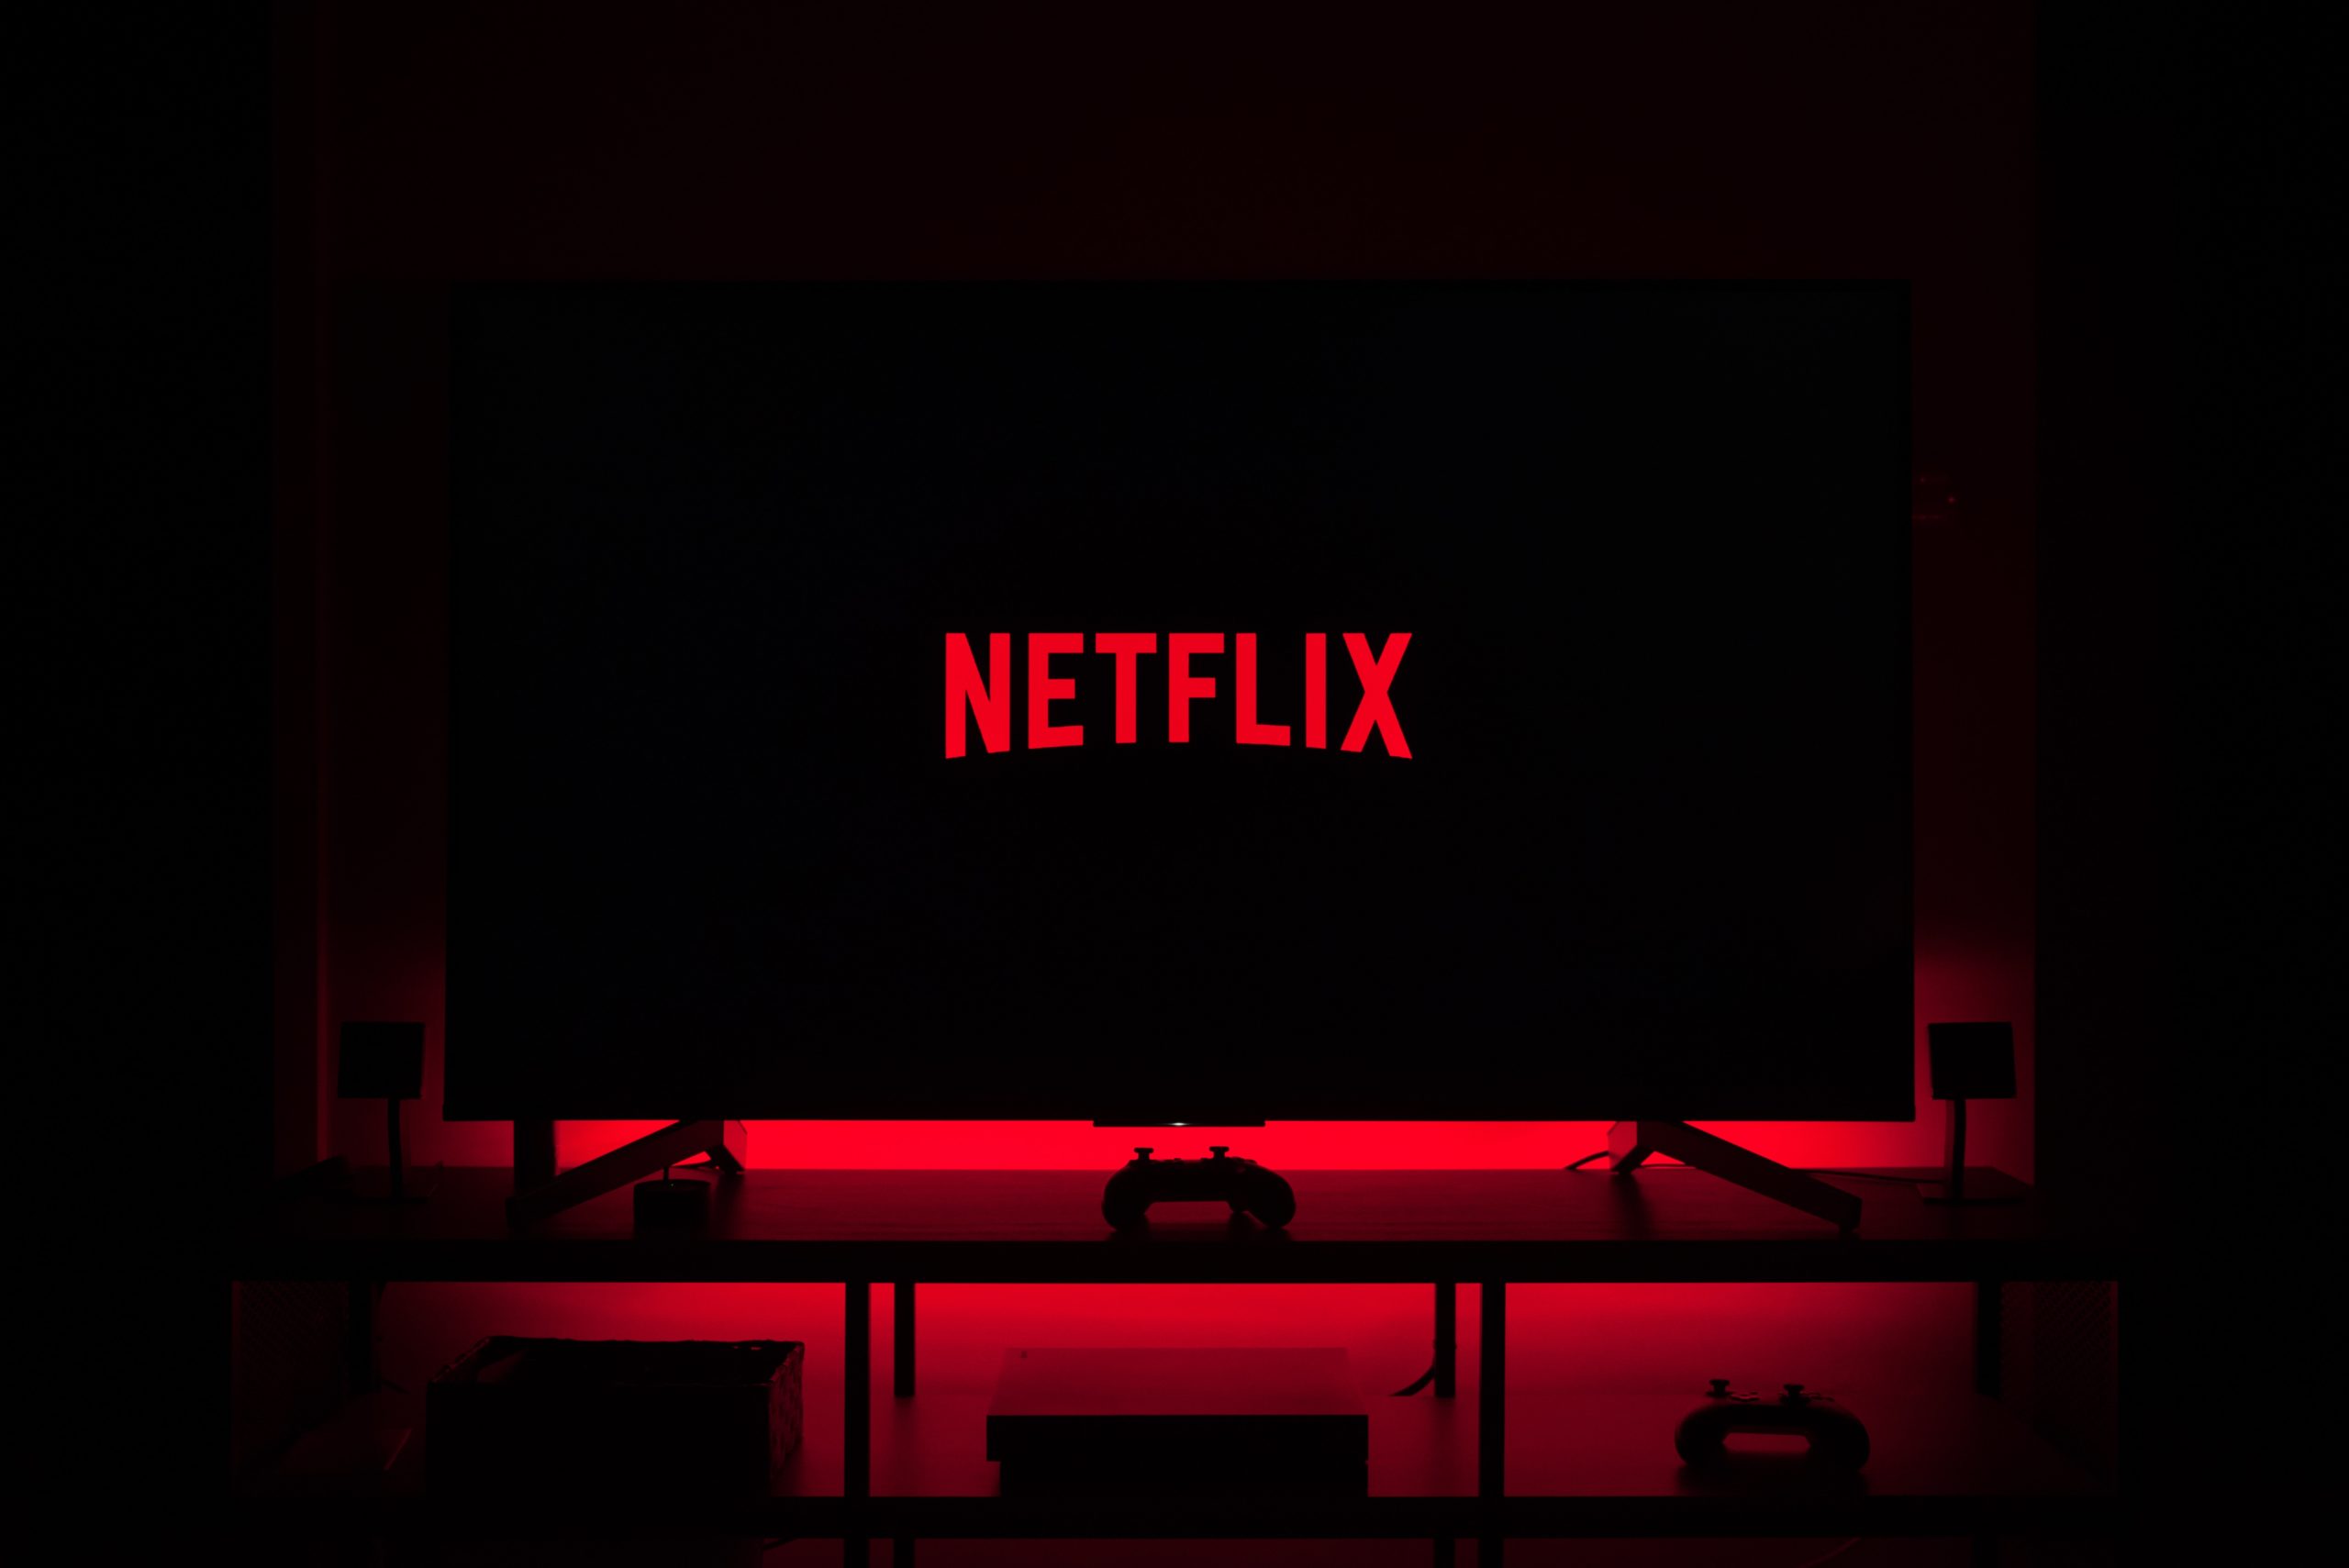 How to change the playback speed on Netflix?